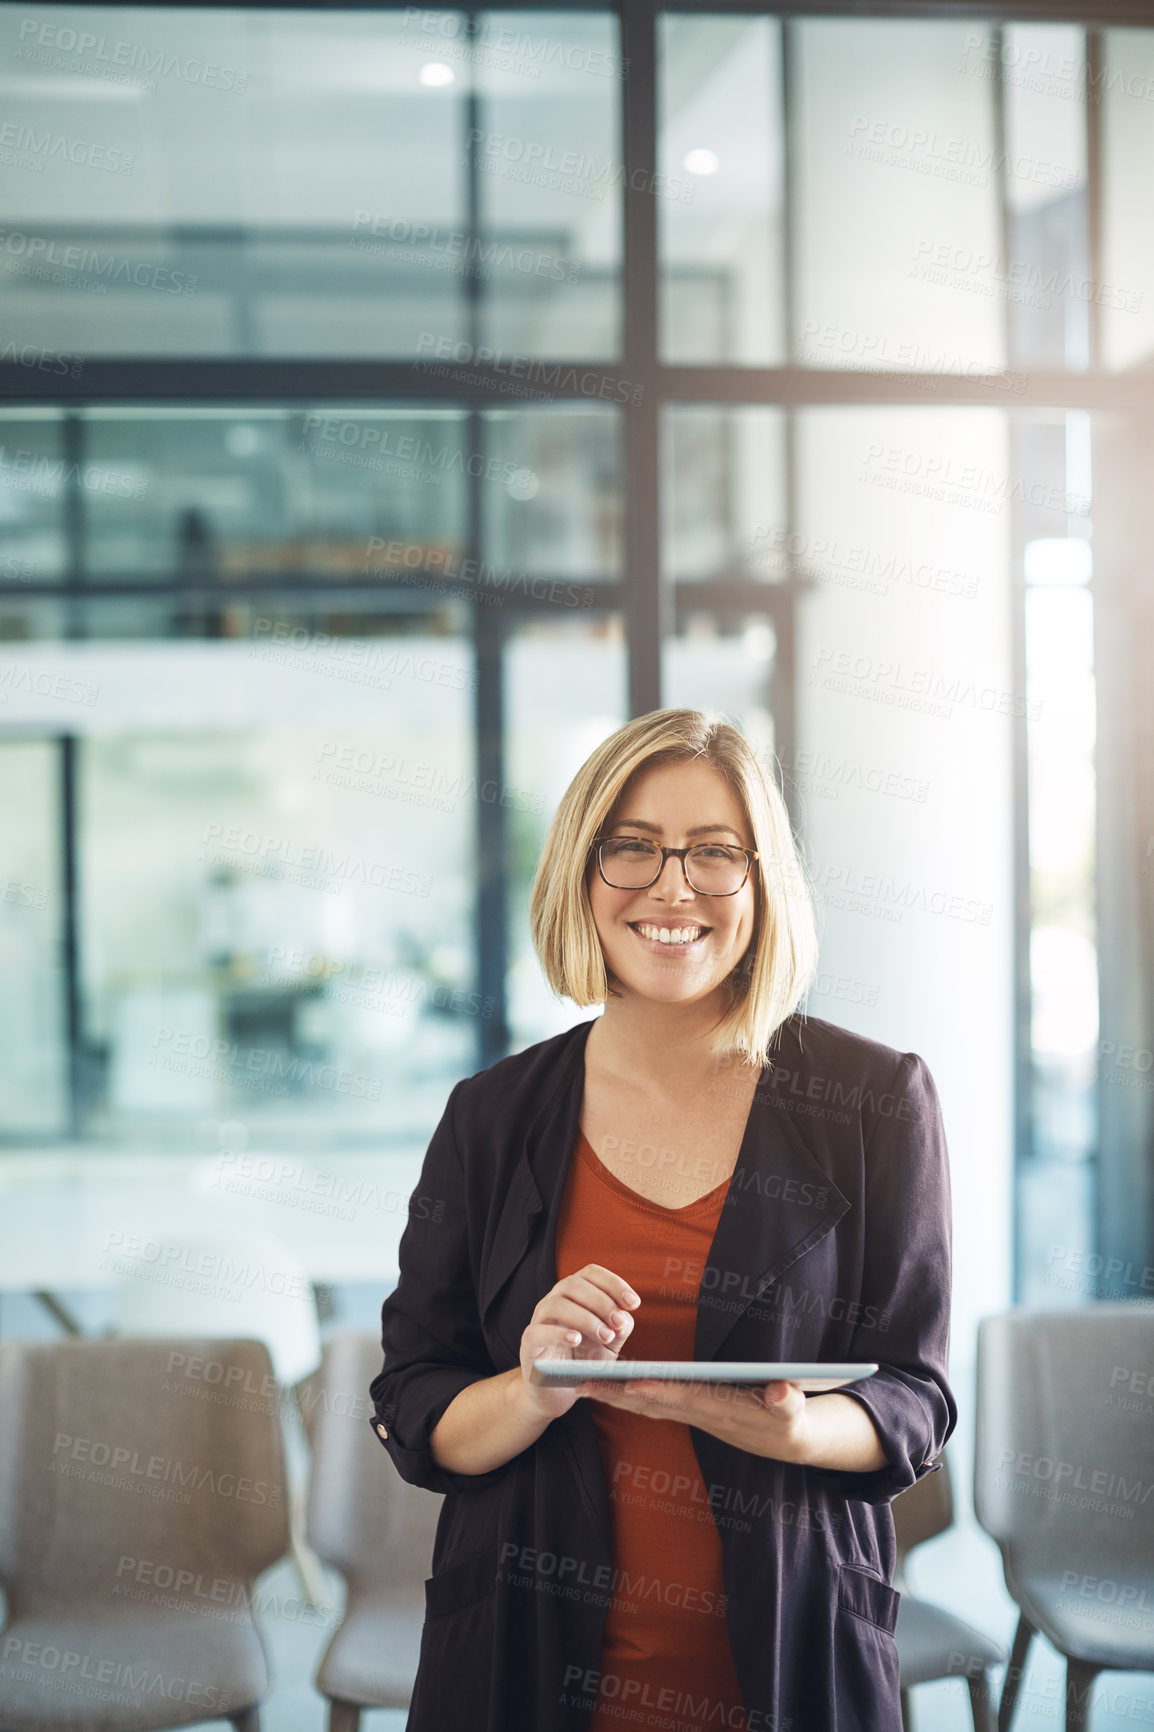 Buy stock photo Confident manager, leader or boss typing on a tablet and standing in her creative office at work. Portrait of a smiling, happy and positive business woman ready for success in her startup company